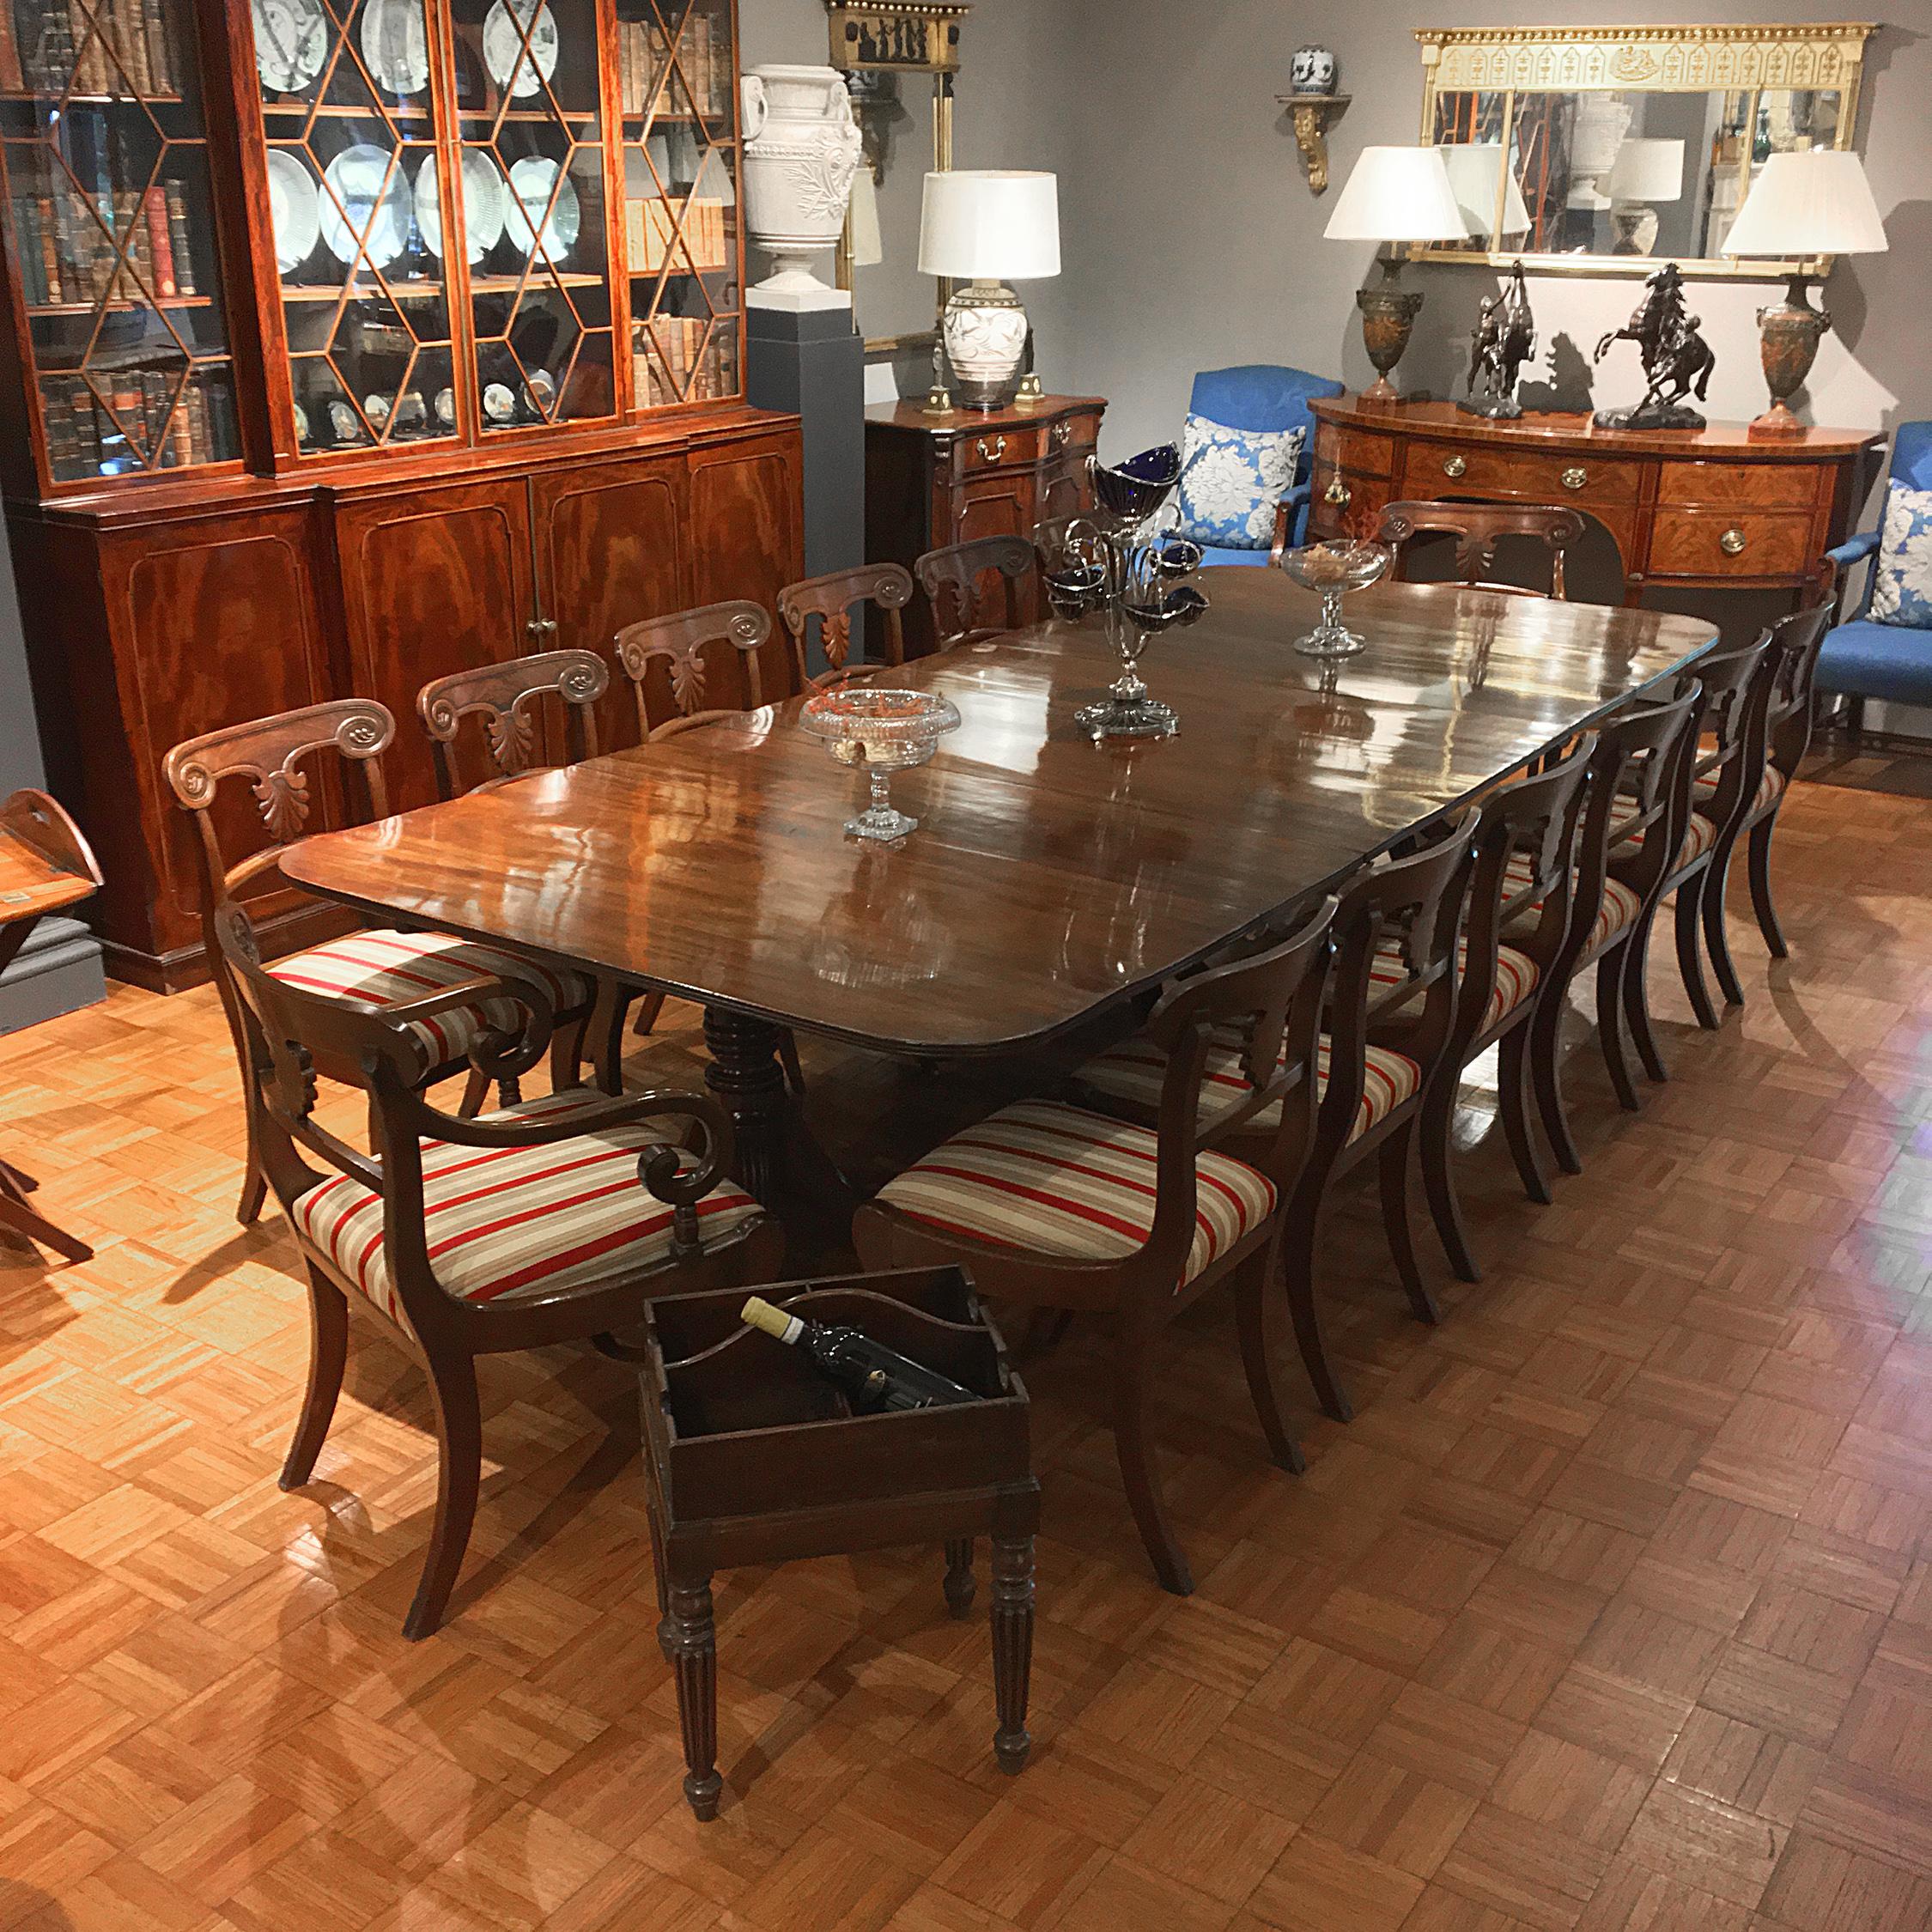 This early 19th century English Regency dining table, of a rich and lovely grained mahogany, has a reeded edge and two center leaves, and is supported by three turned pedestal bases, each with four reeded and splayed legs, with brass caps and